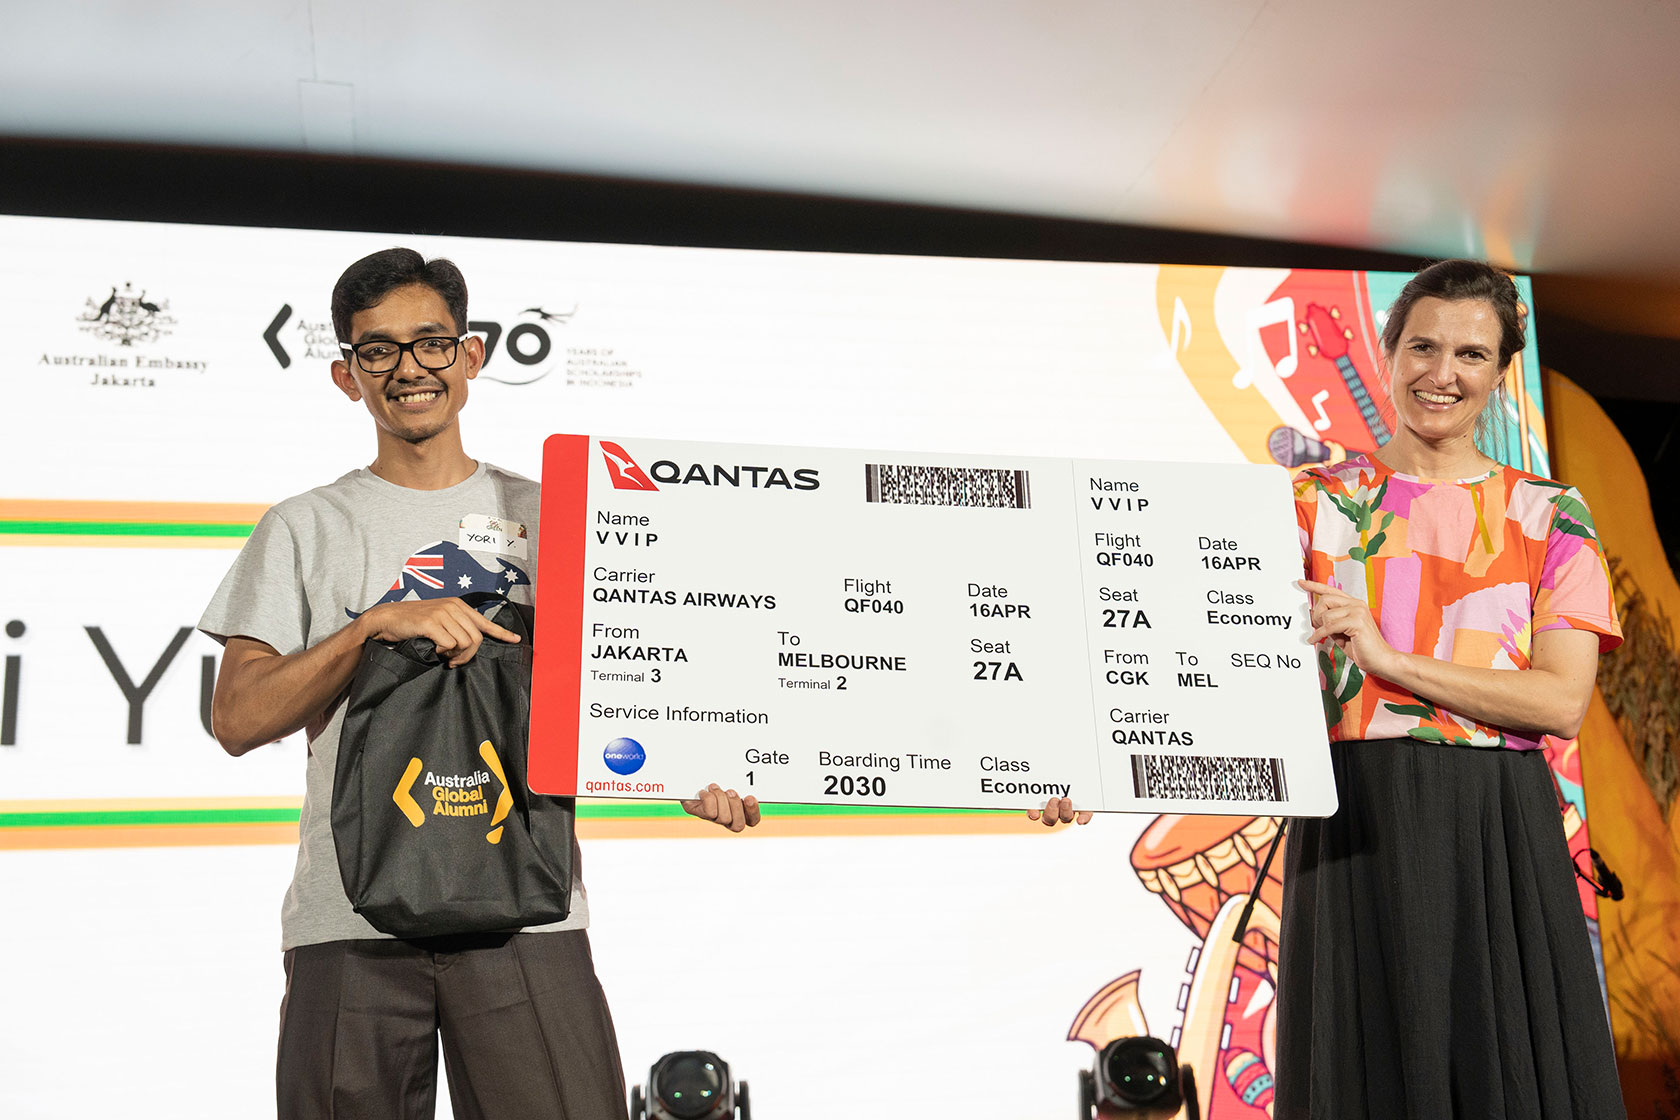 A lucky alumnus wins a door prize – a round-trip ticket from Jakarta to Sydney/Melbourne, courtesy of Qantas.